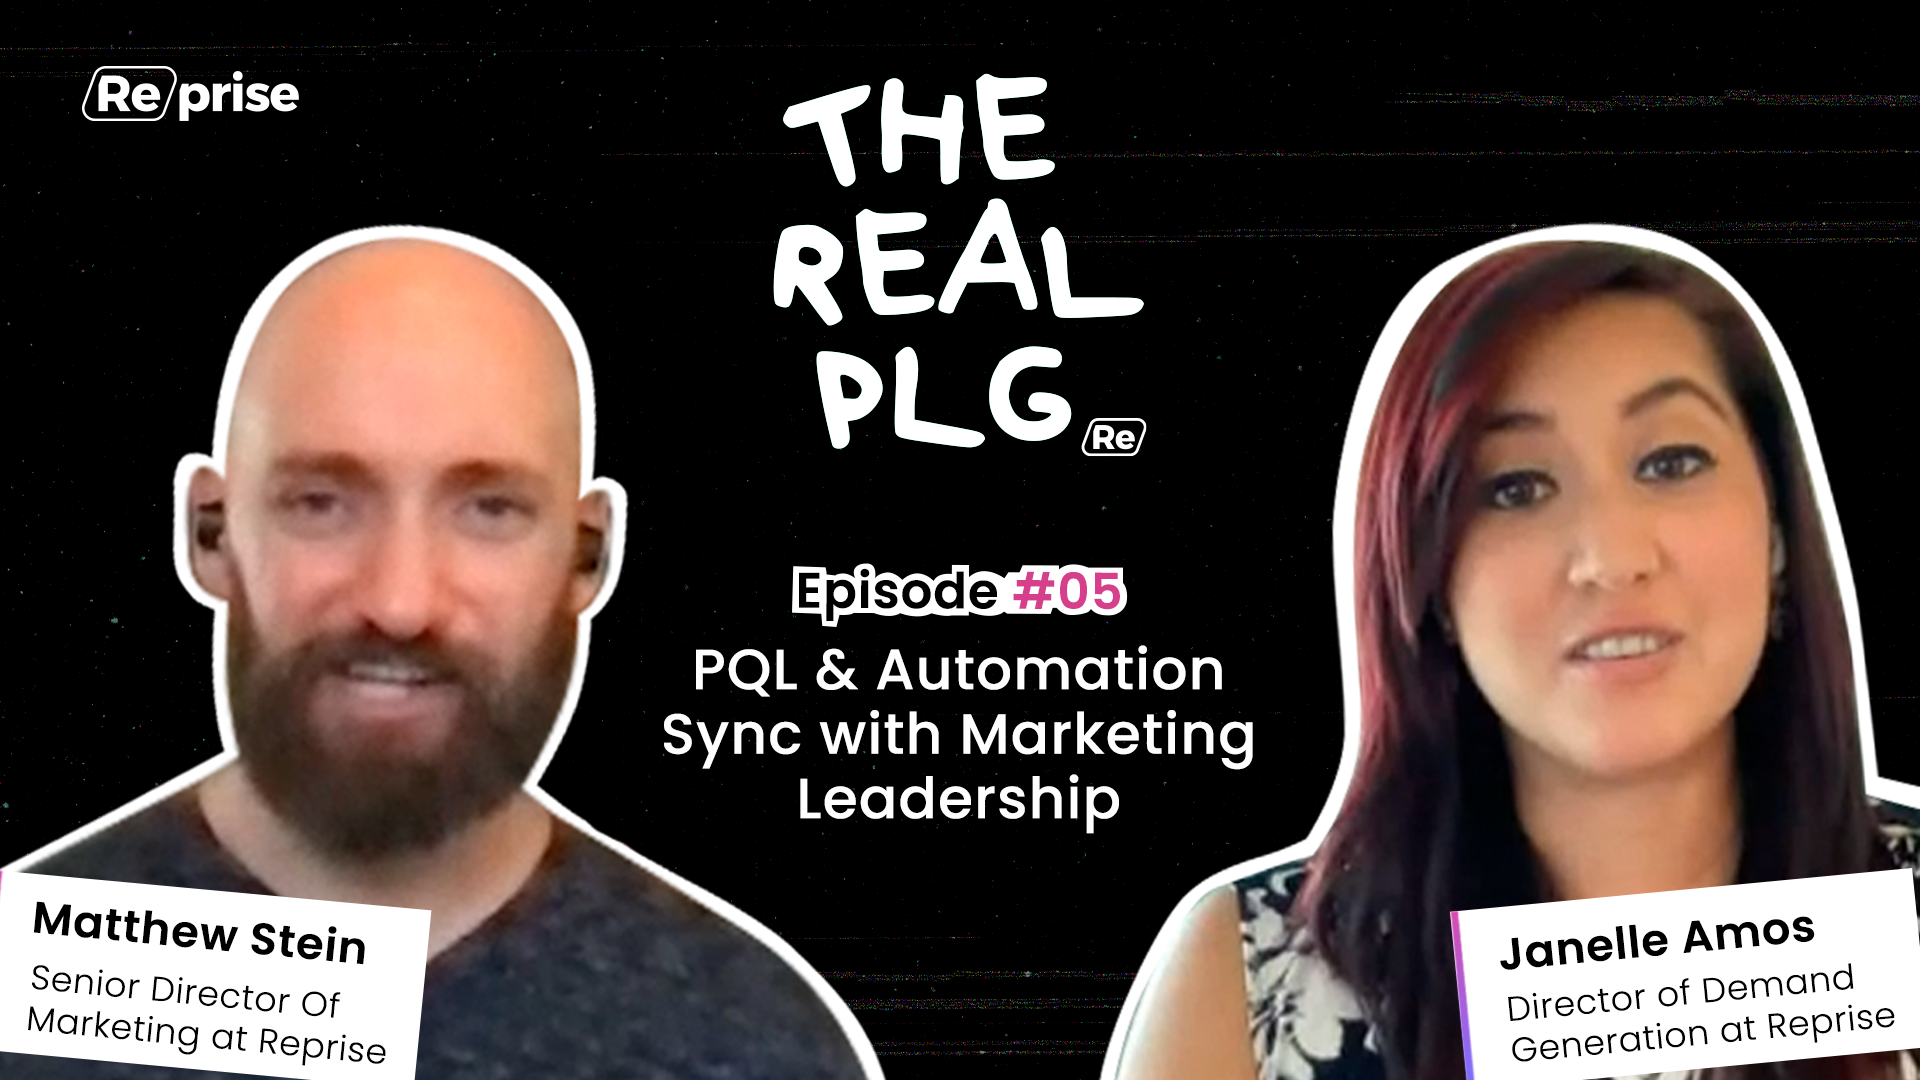 #TheRealPLG – EP 05 | PQL & Automation Sync with Marketing Leadership